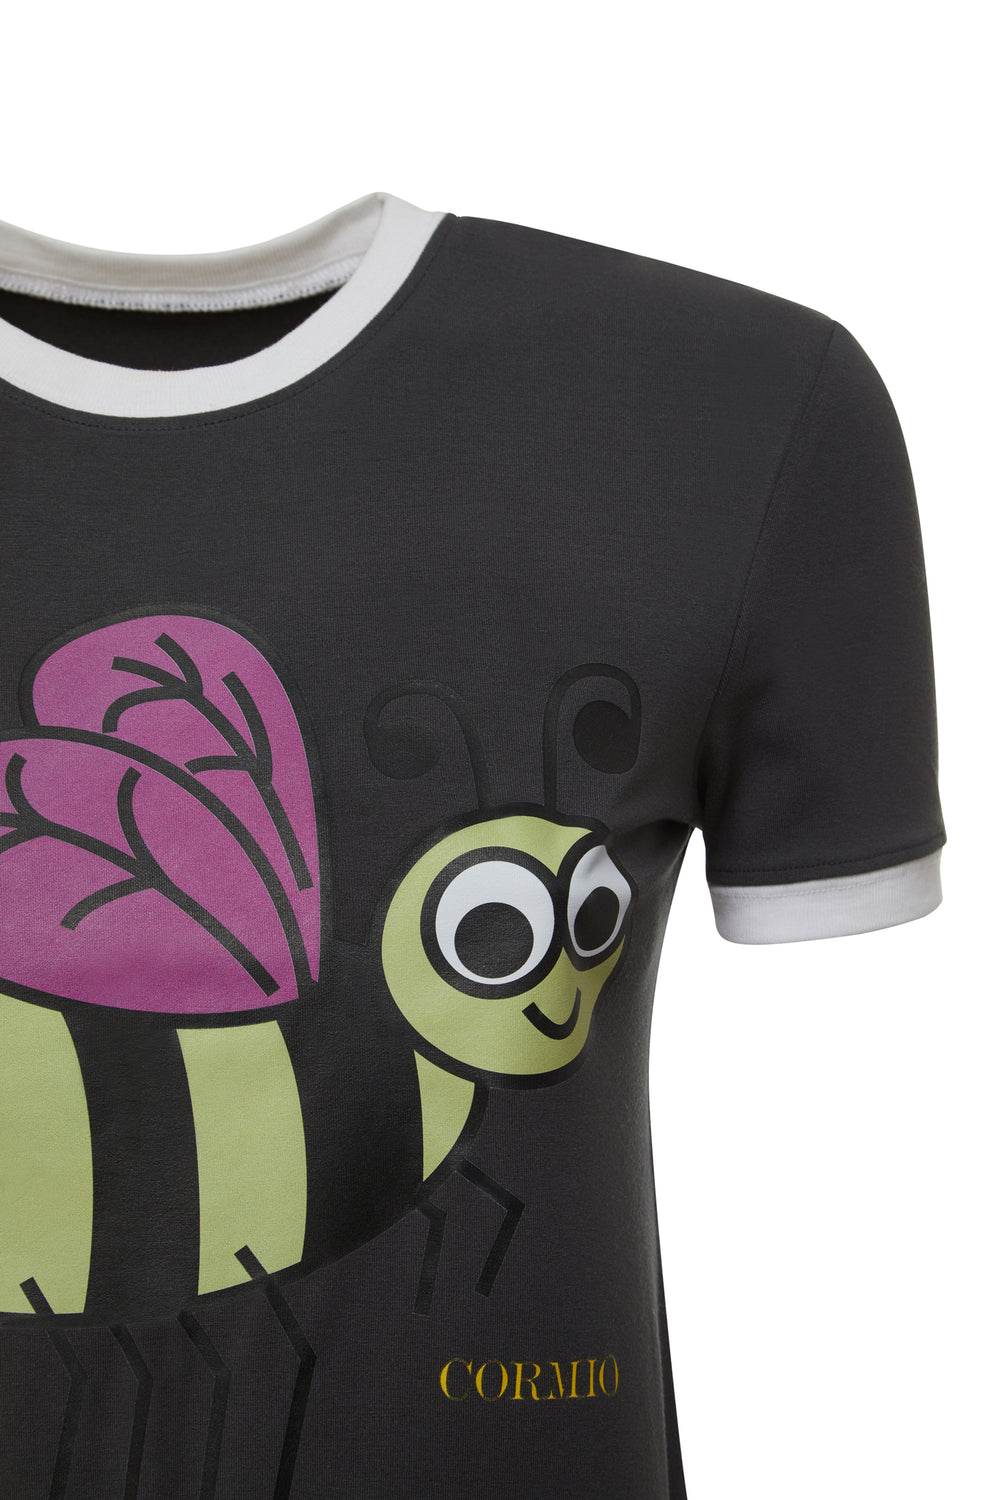 product-color-Busy as a Bee T-Shirt